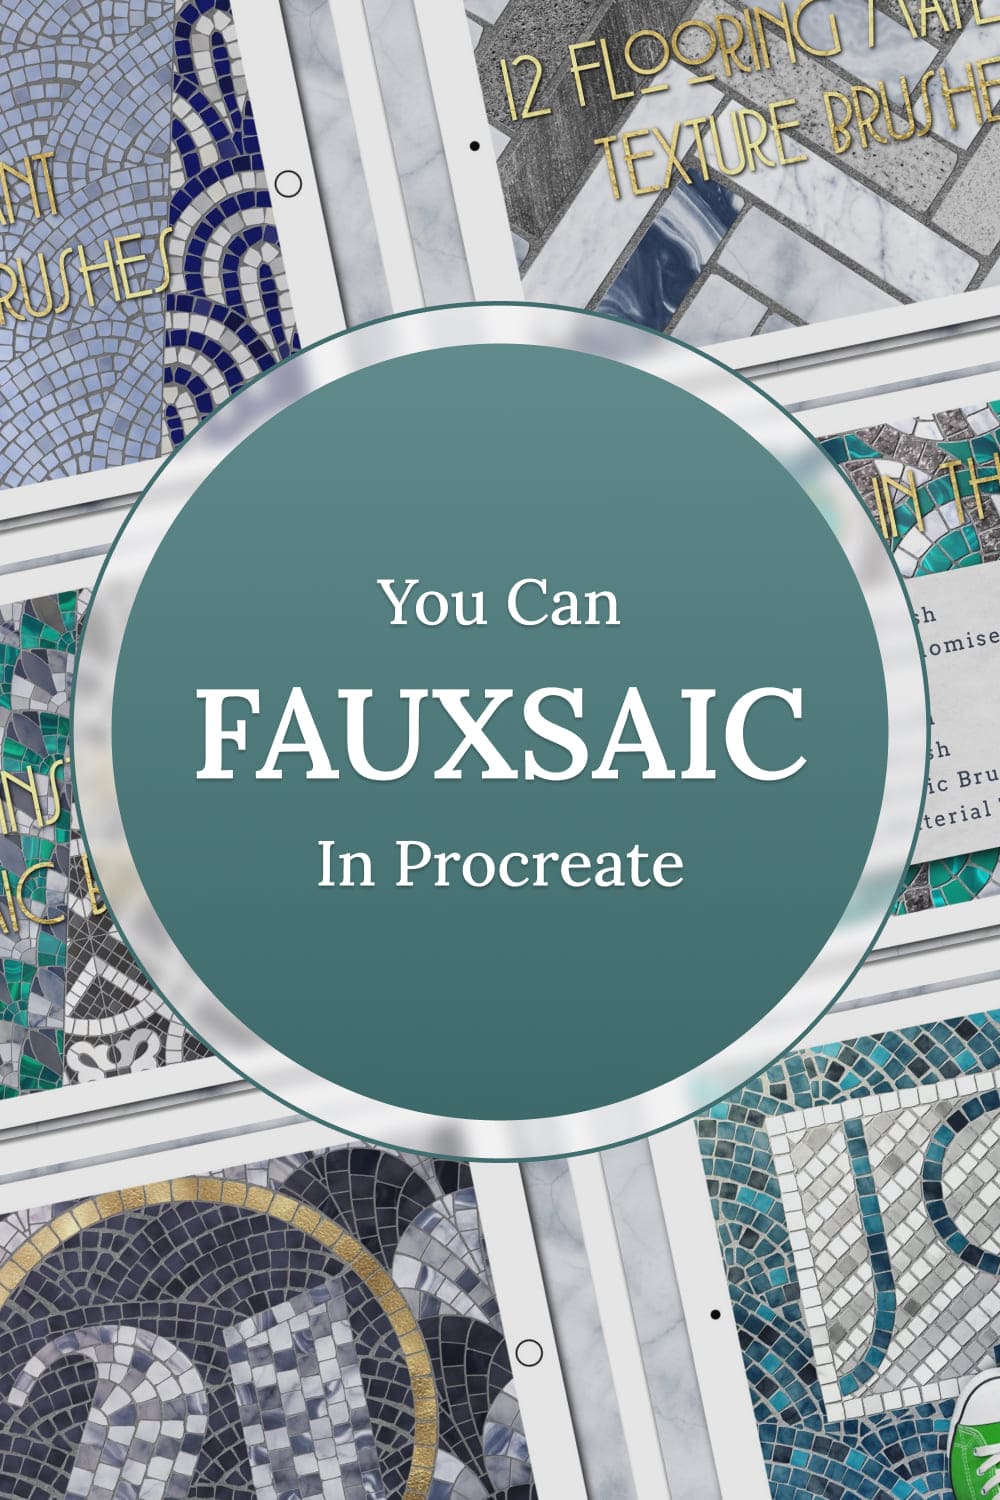 You can Fauxsaic in procreate, picture for Pinterest 1000x1500.